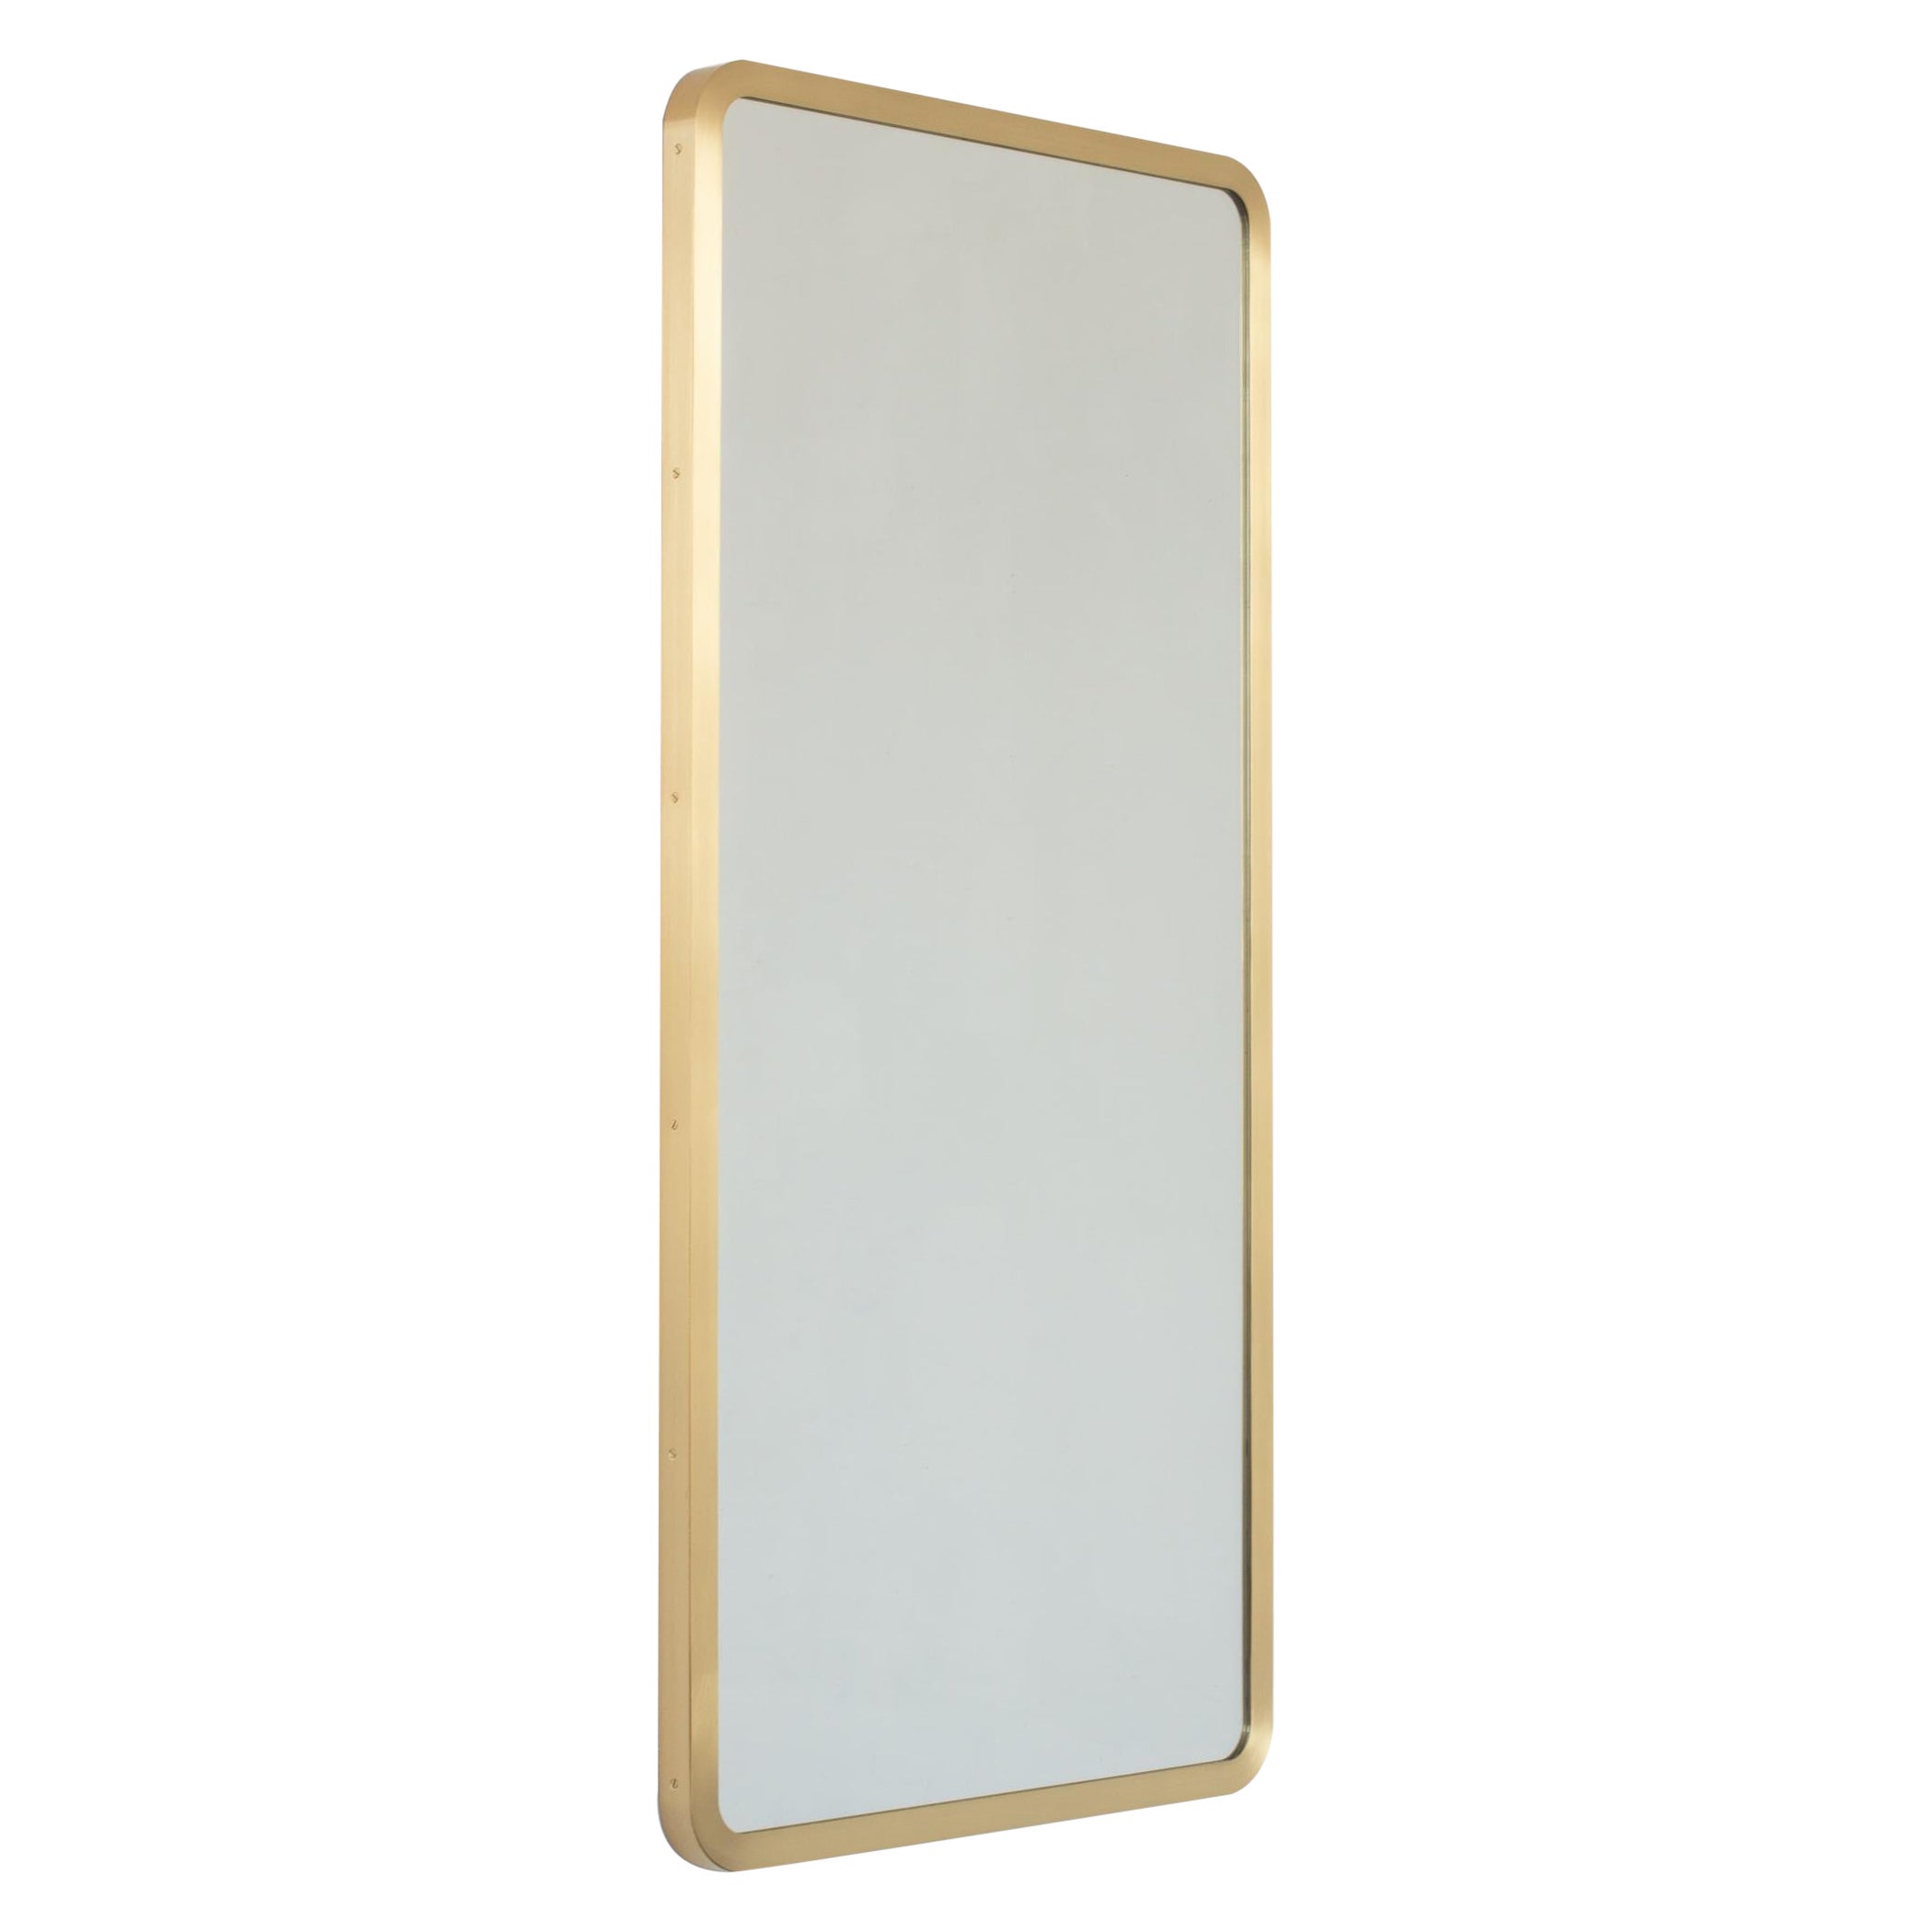 Quadris Rectangular Modern Mirror with a Brass Full Front Frame, Small For Sale